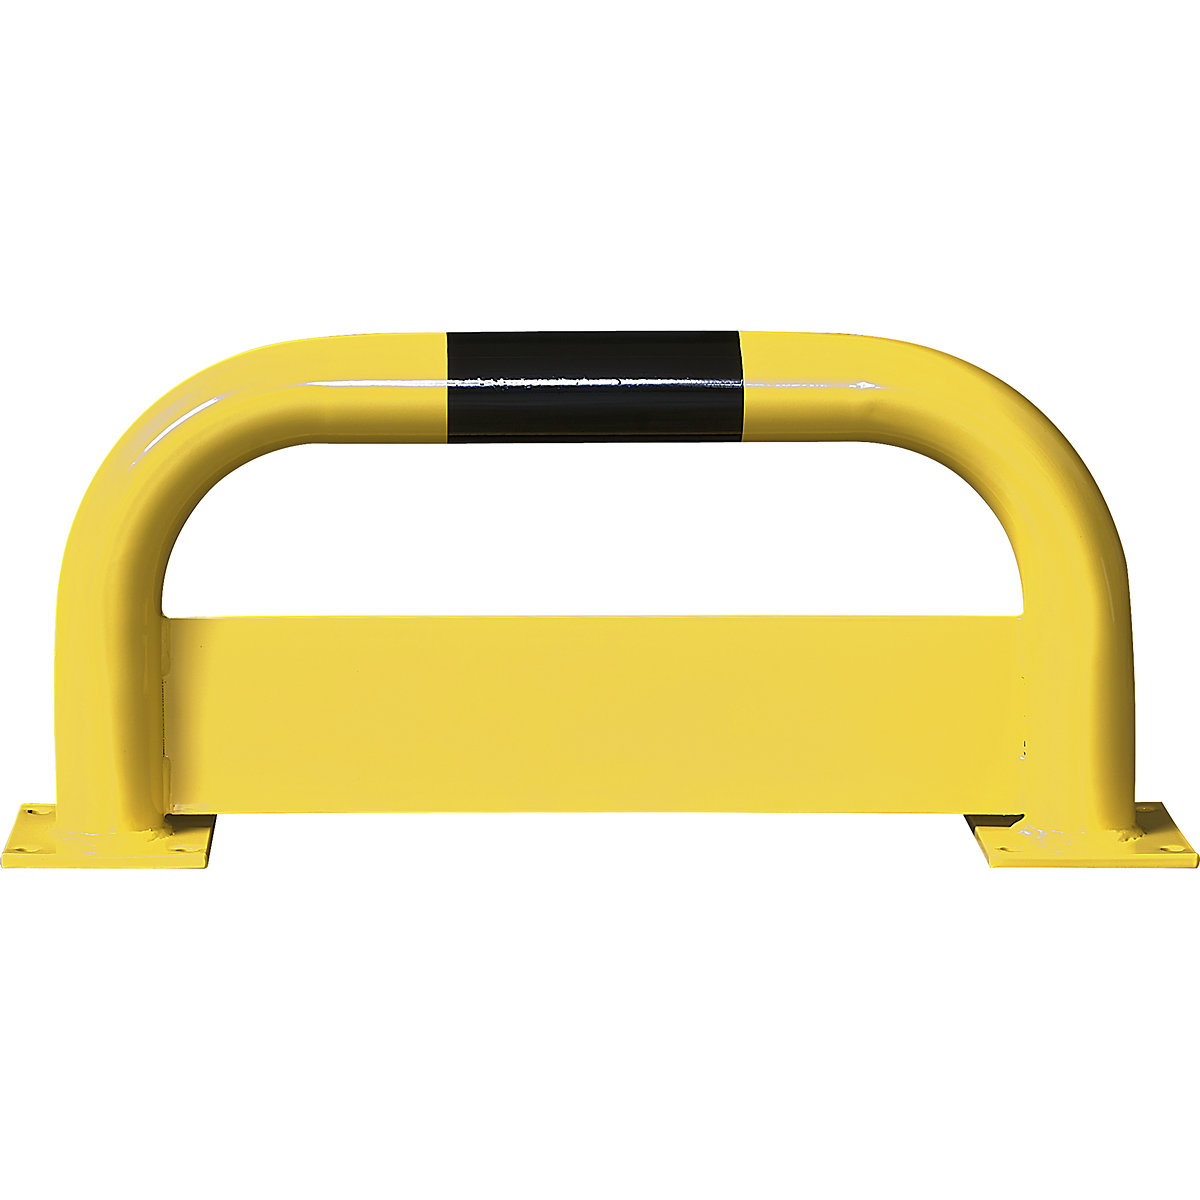 Crash protection barrier with forklift guard